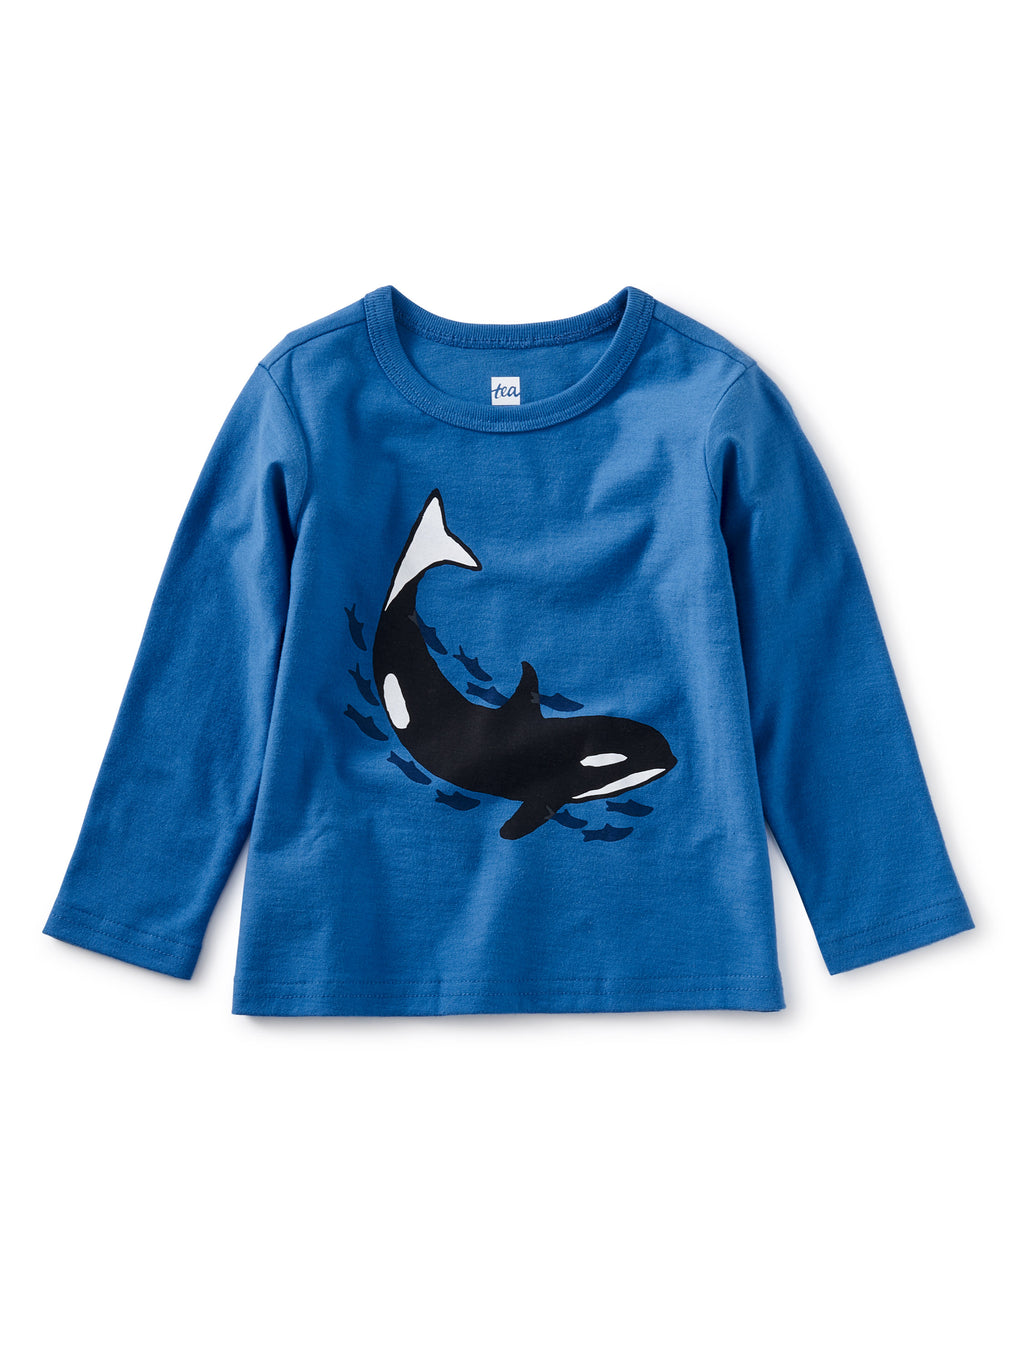 BABY ORCA GRAPHIC TEE